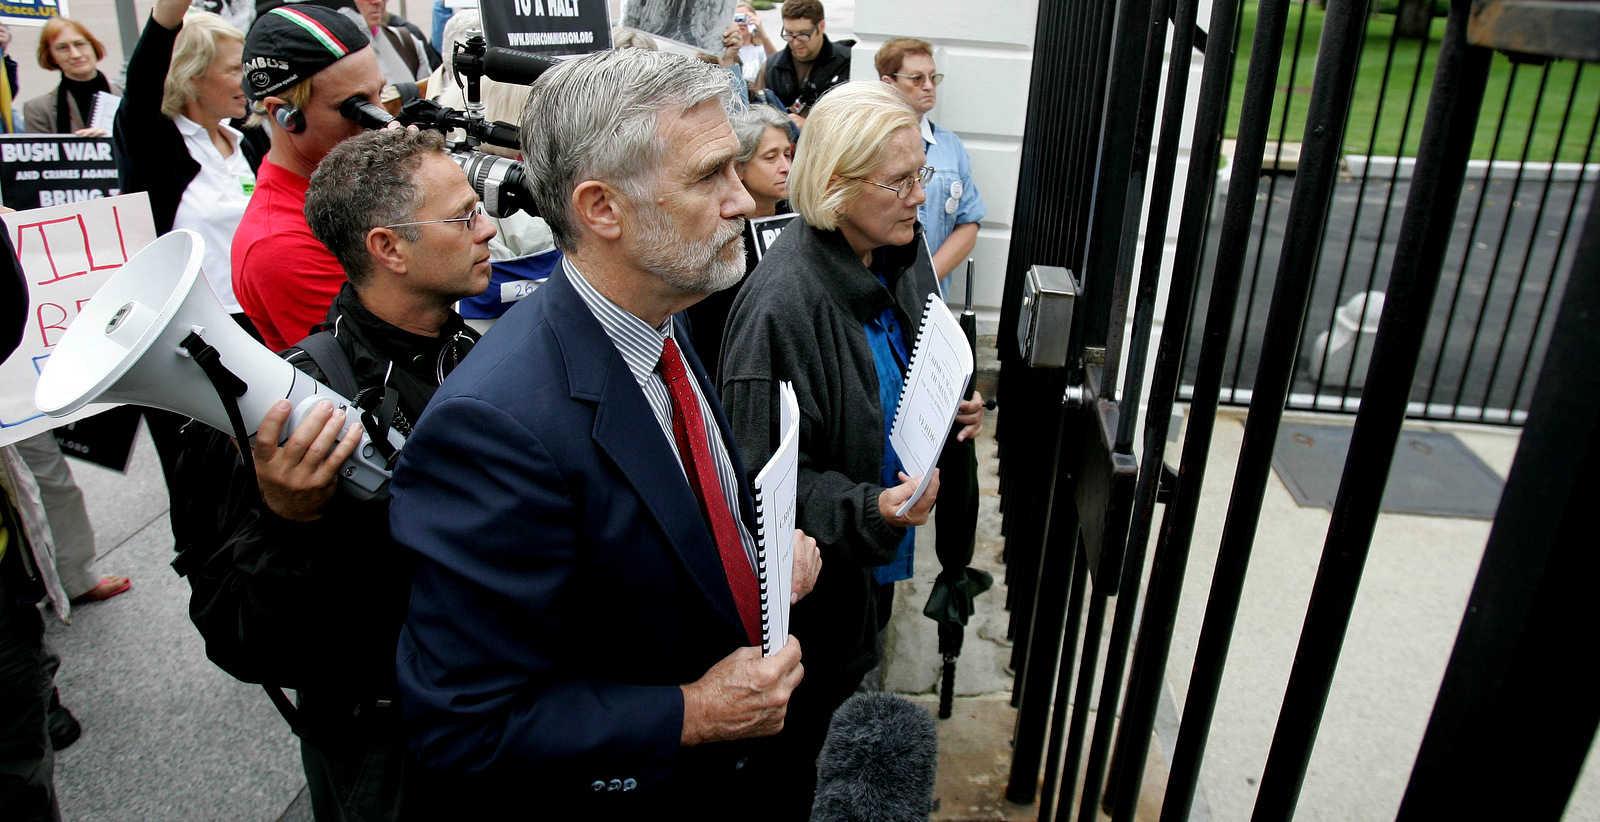 Ray McGovern, center, and Ann Wright, right, with the Bush Crimes Commission try to deliver to the White House in Washington, Sept. 13, 2006, to President Bush. The citizens' Commission of Inquiry concluded its year-long investigation into whether the Bush administration has committed war crimes and crimes against humanity. White House officers refused the item and ask them to mail it to the White House. (AP/Ron Edmonds)